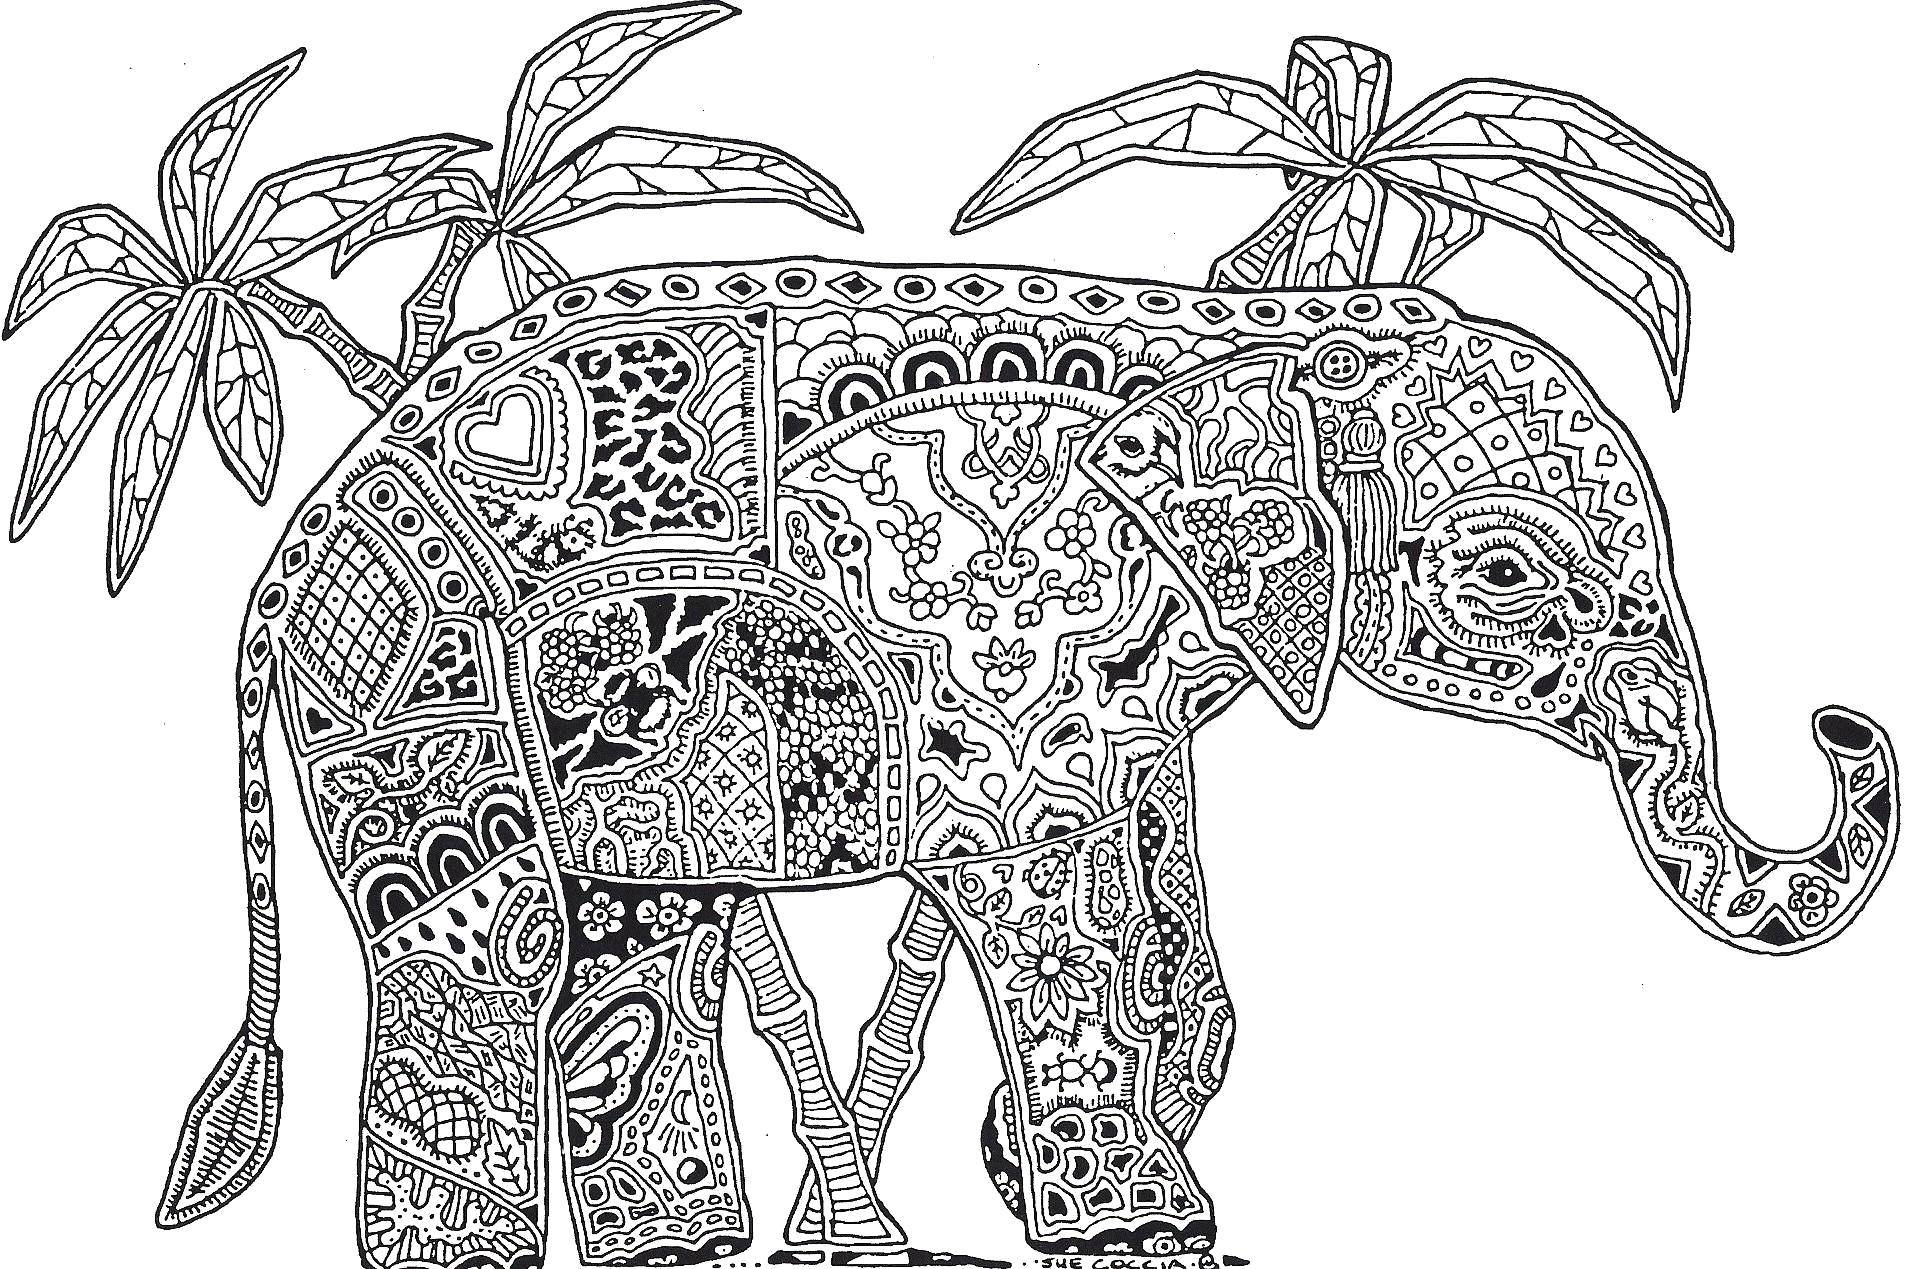 Coloring The elephant in the patterns. Category patterns. Tags:  Patterns, animals.